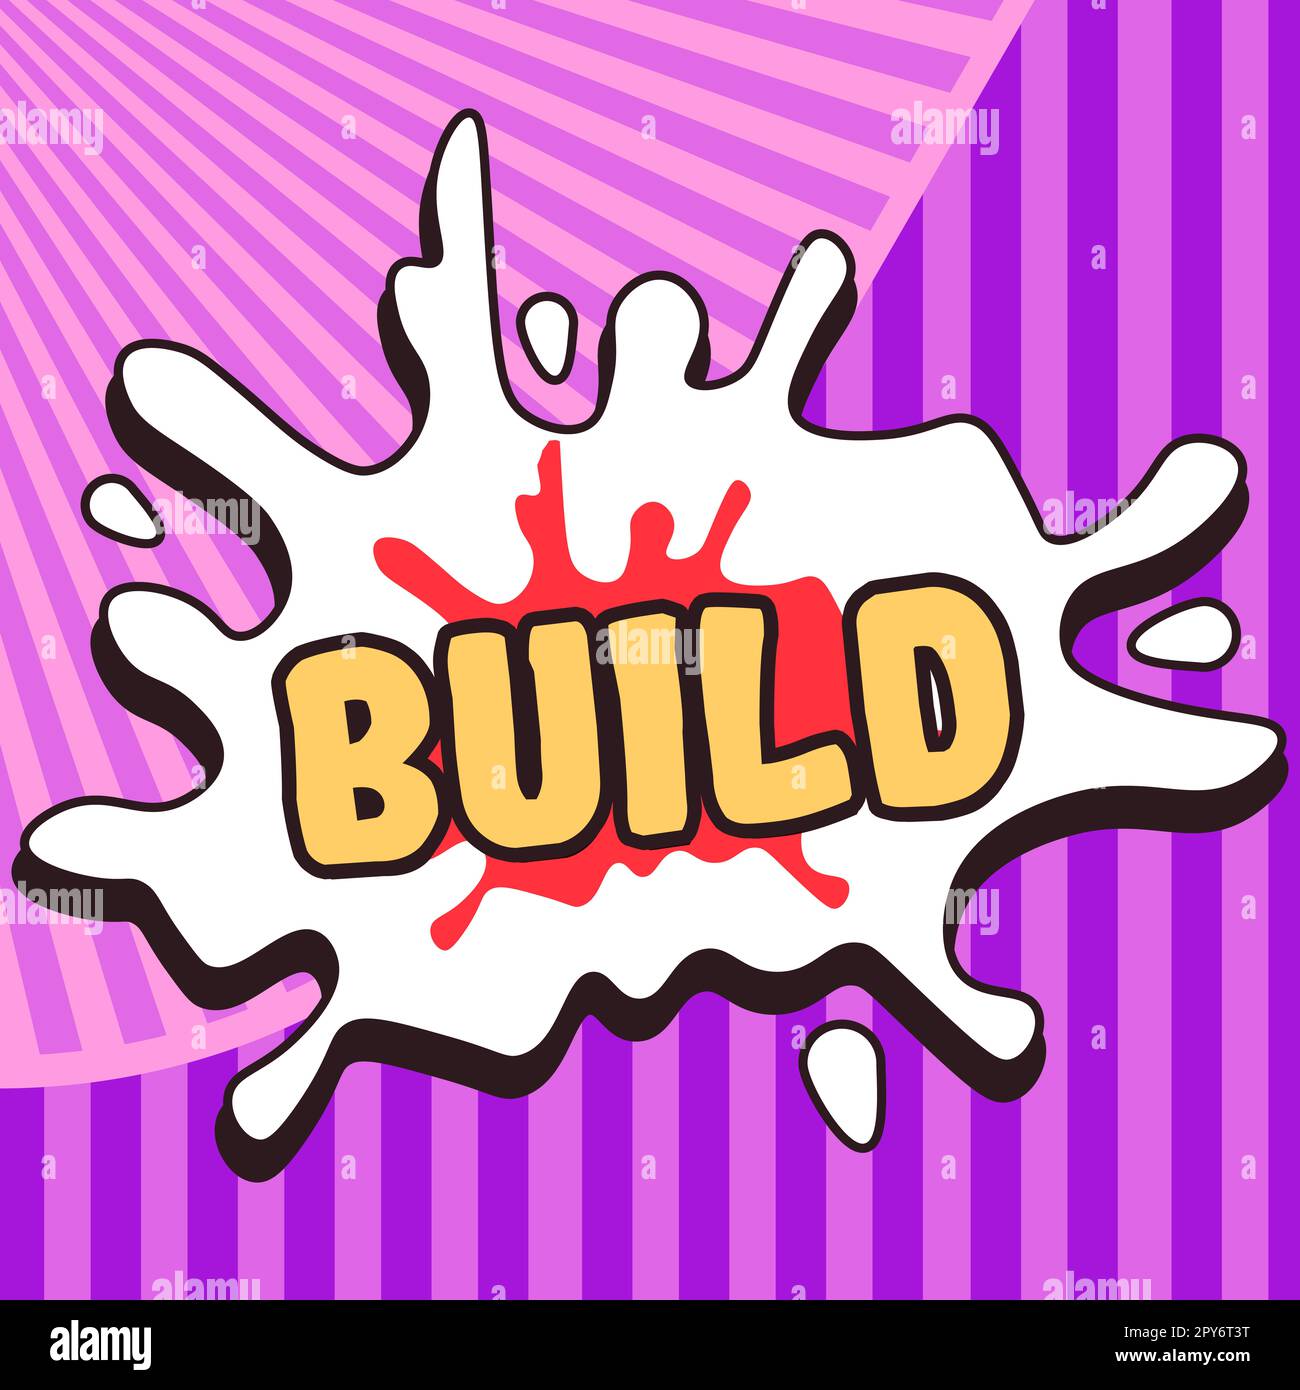 Text caption presenting Build. Business overview Construct something by putting material together over a period of time Stock Photo